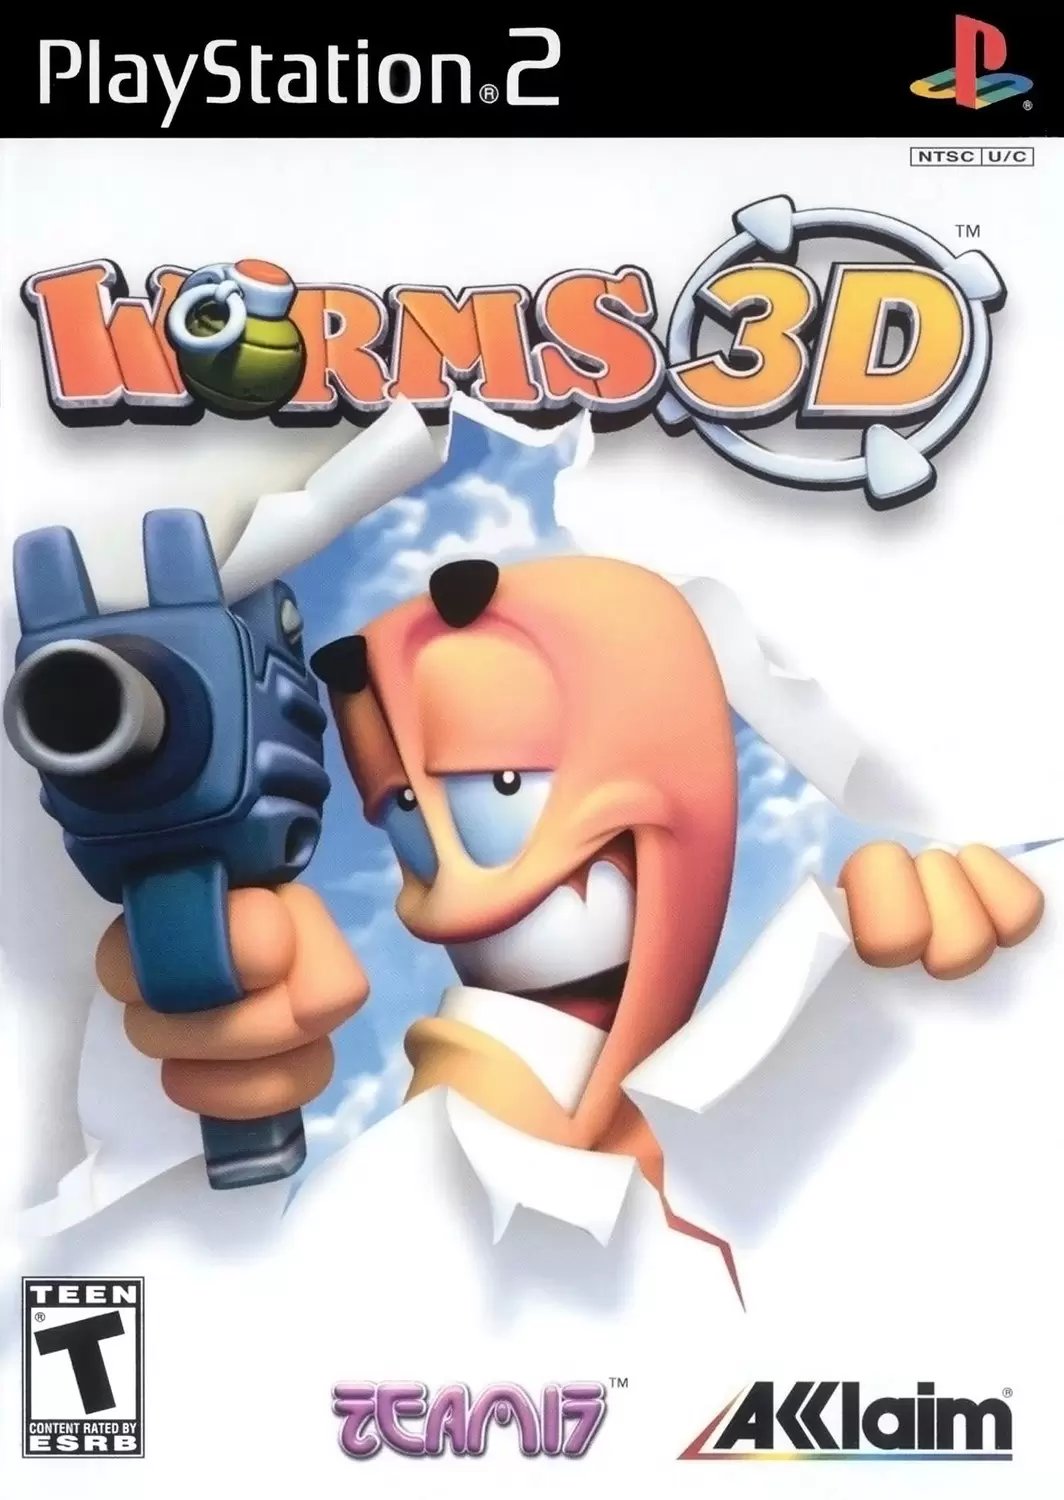 PS2 Games - Worms 3D